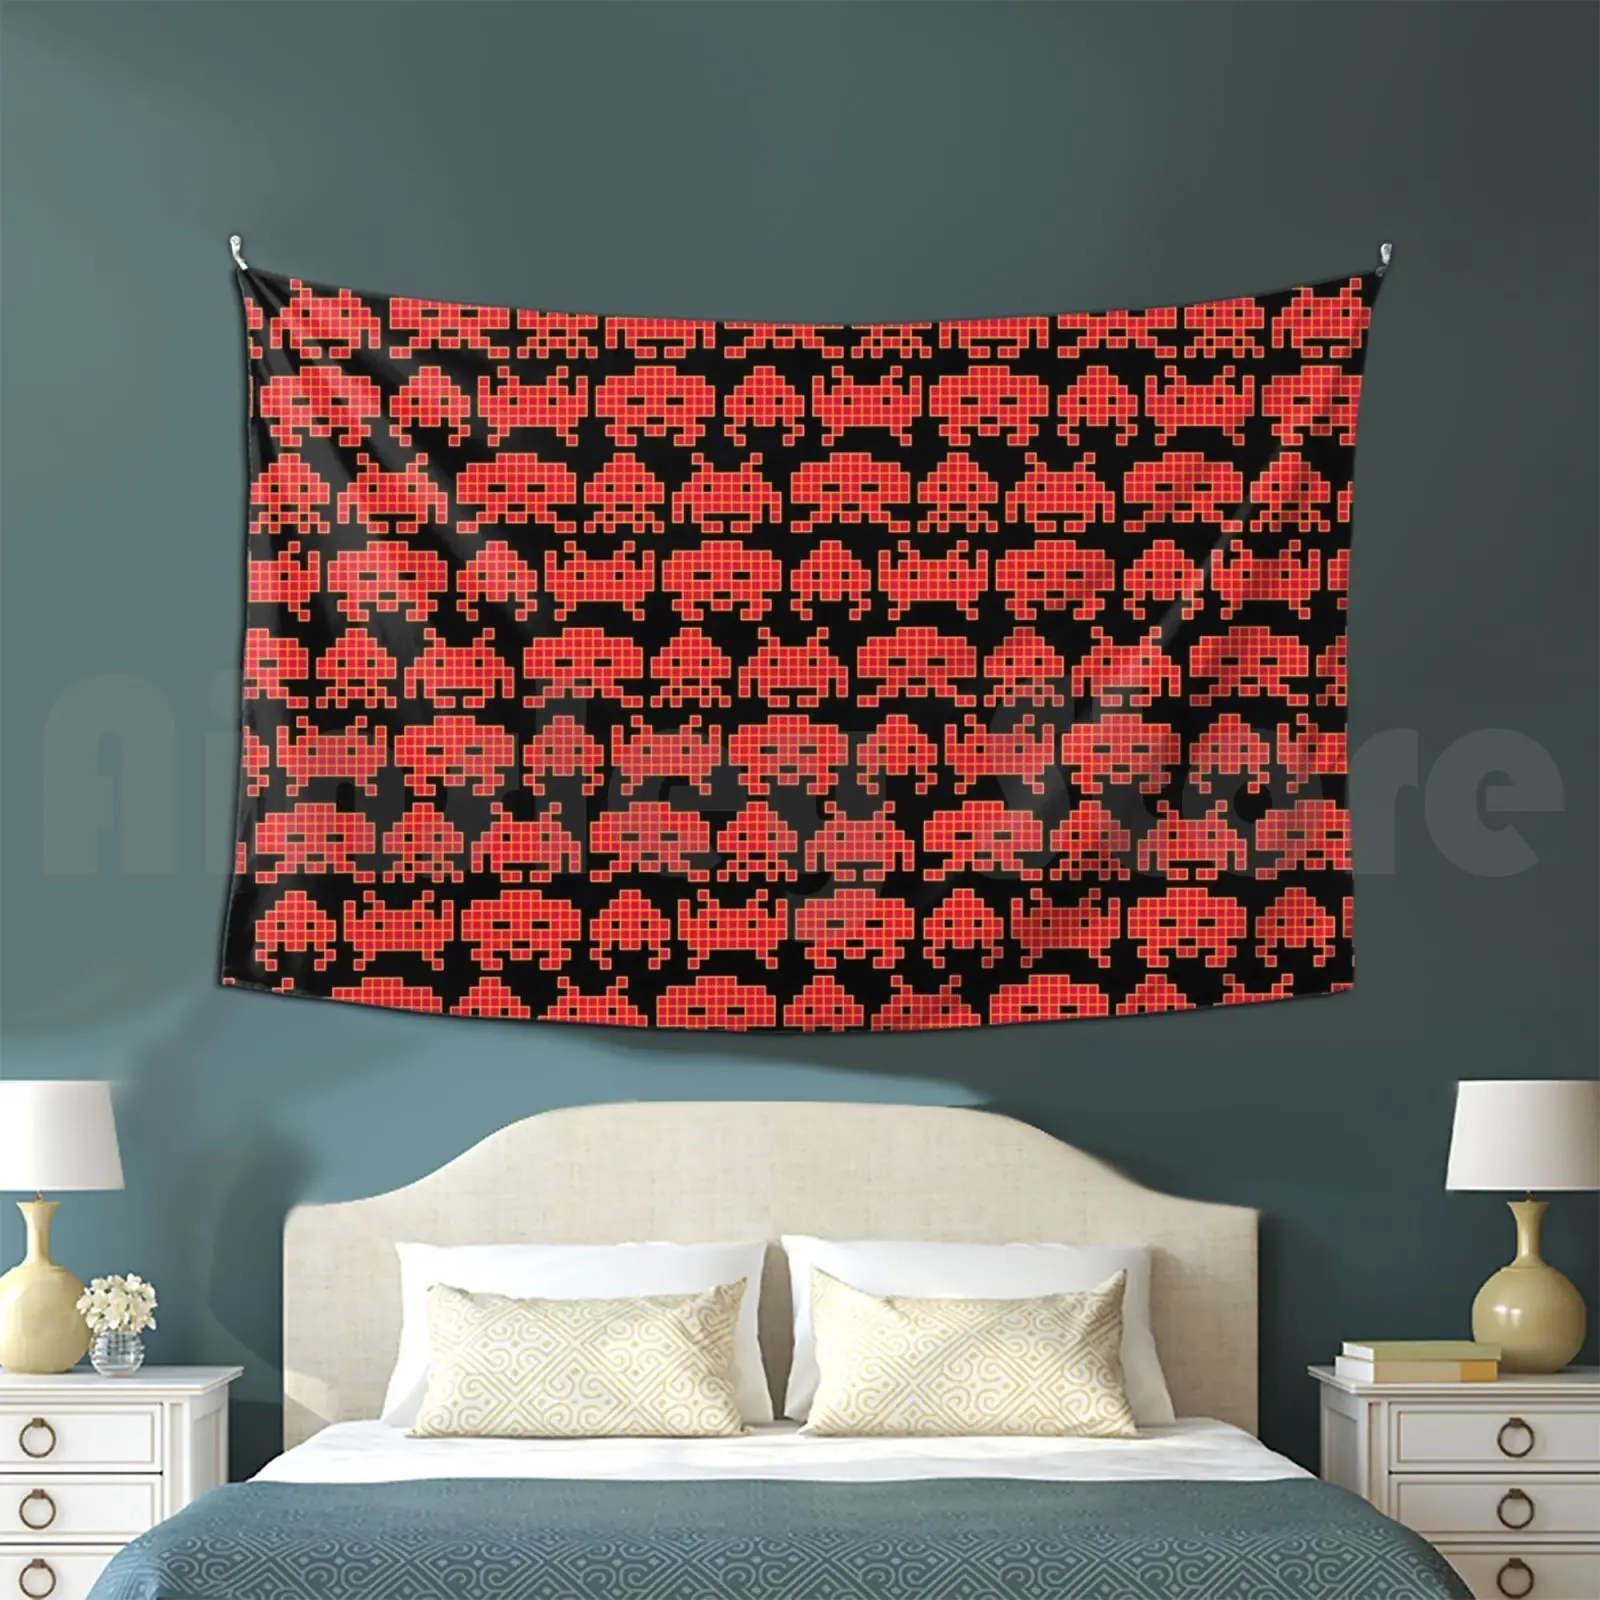 

Invaded Tapestry Living Room Bedroom Space Invader Game Gaming Retro 80s Computer Pixel Cube Cubic Geometric Invasion